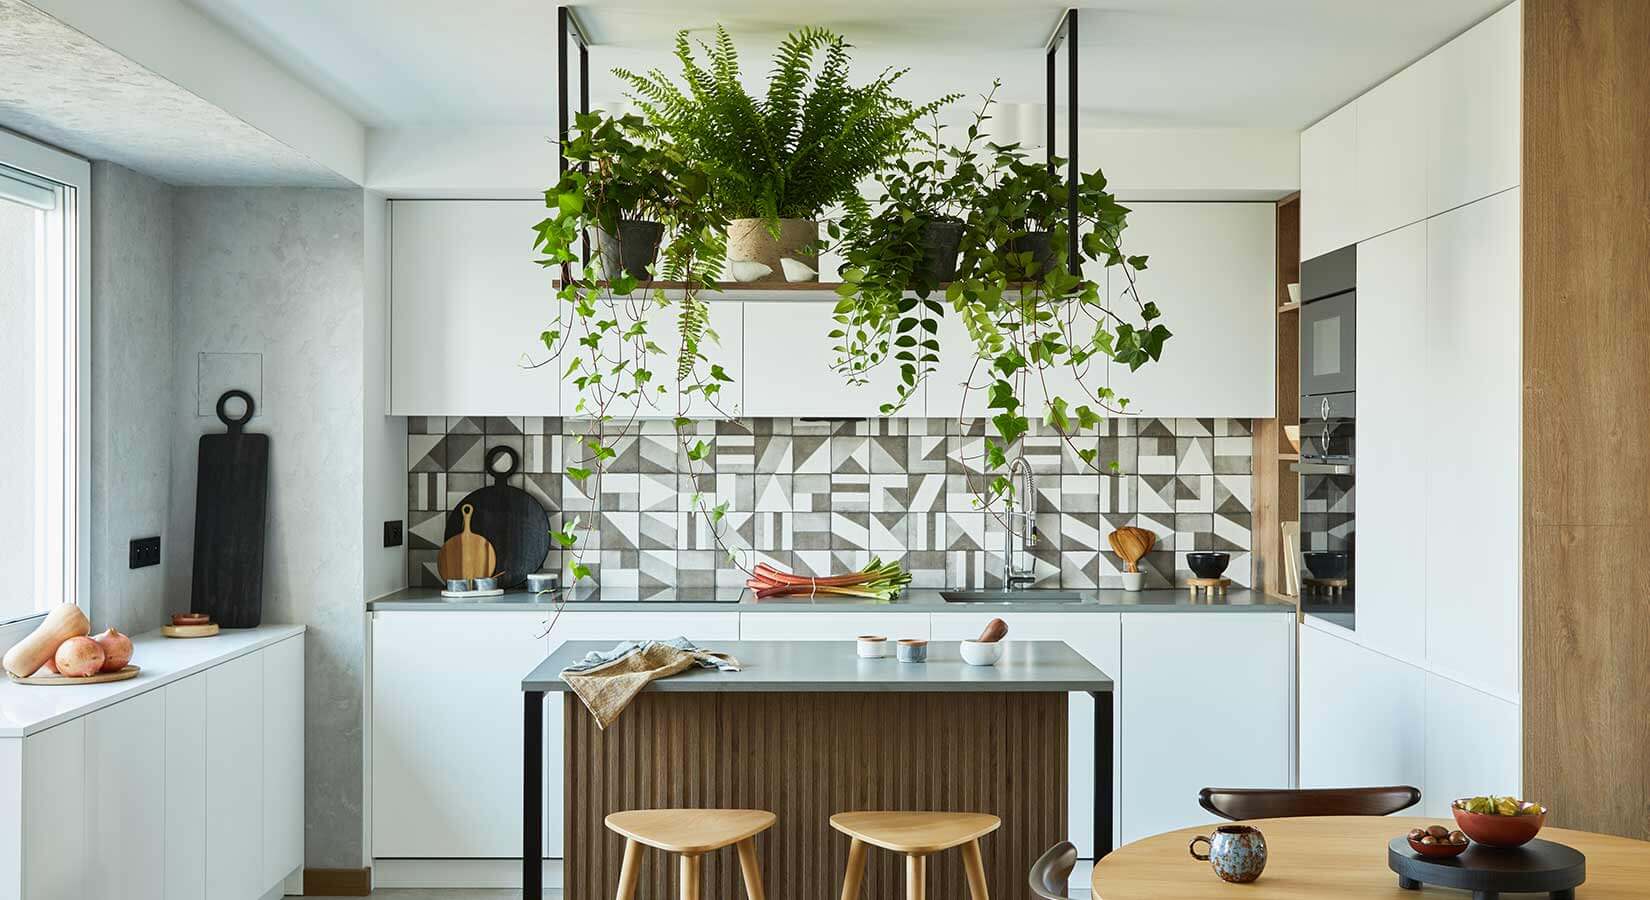 Small kitchen with white cabinets and gray mosaic backsplash with plants suspended over kitchen island.